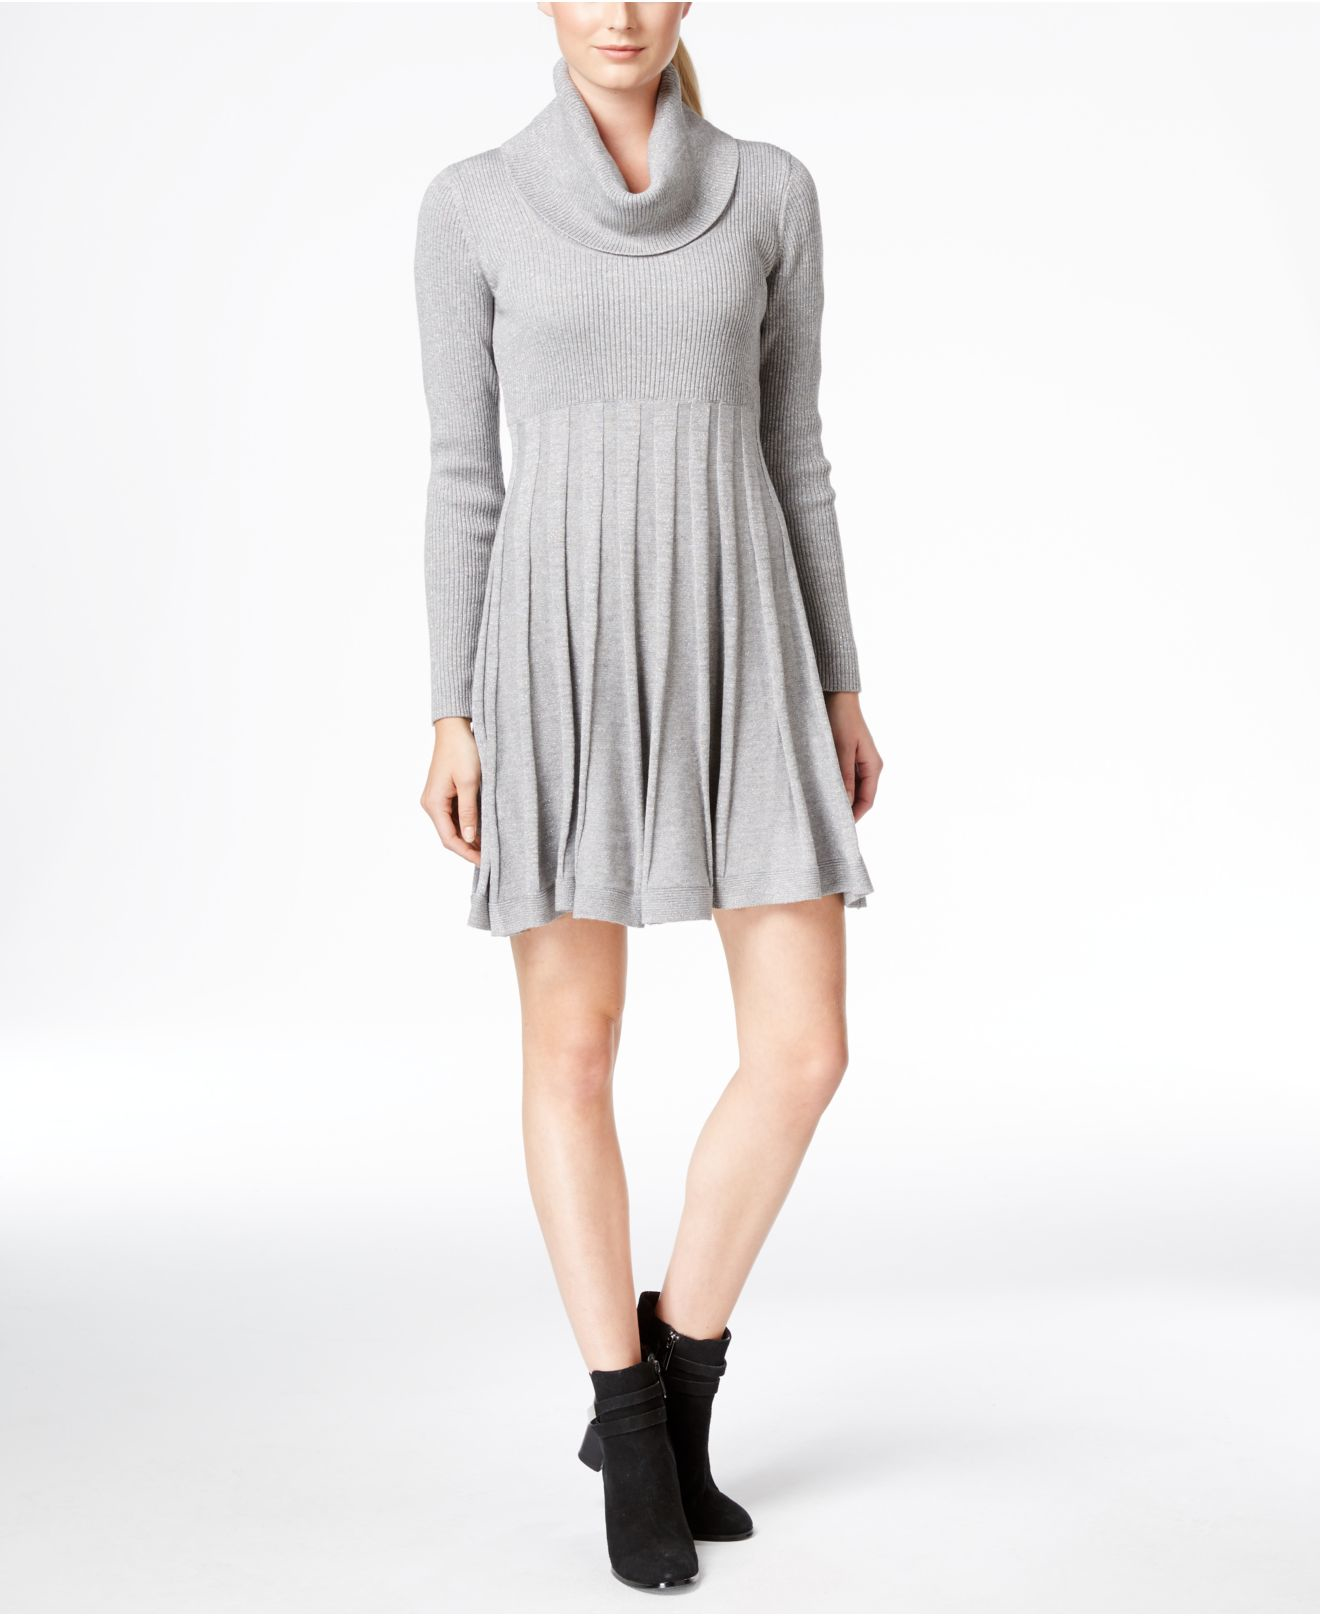 Lyst - Calvin Klein Cowl-neck Fit & Flare Sweater Dress in Gray